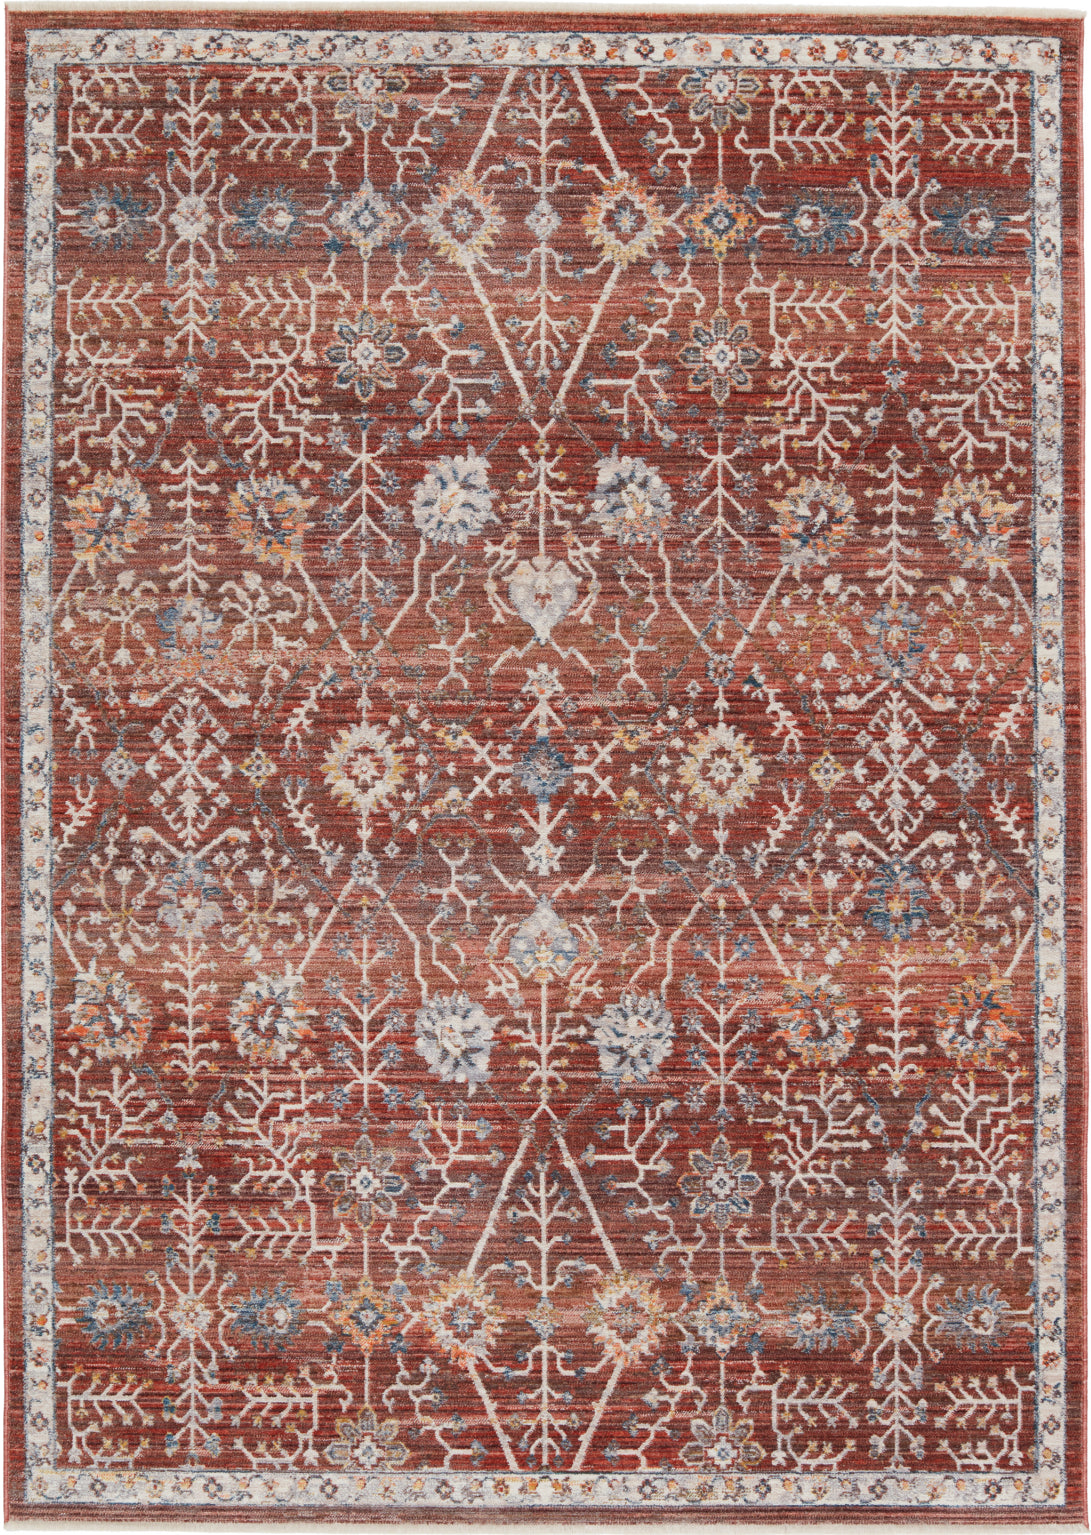 Jaipur Living Terra Katalia TRR14 Red/Blue Area Rug by Vibe - Top Down